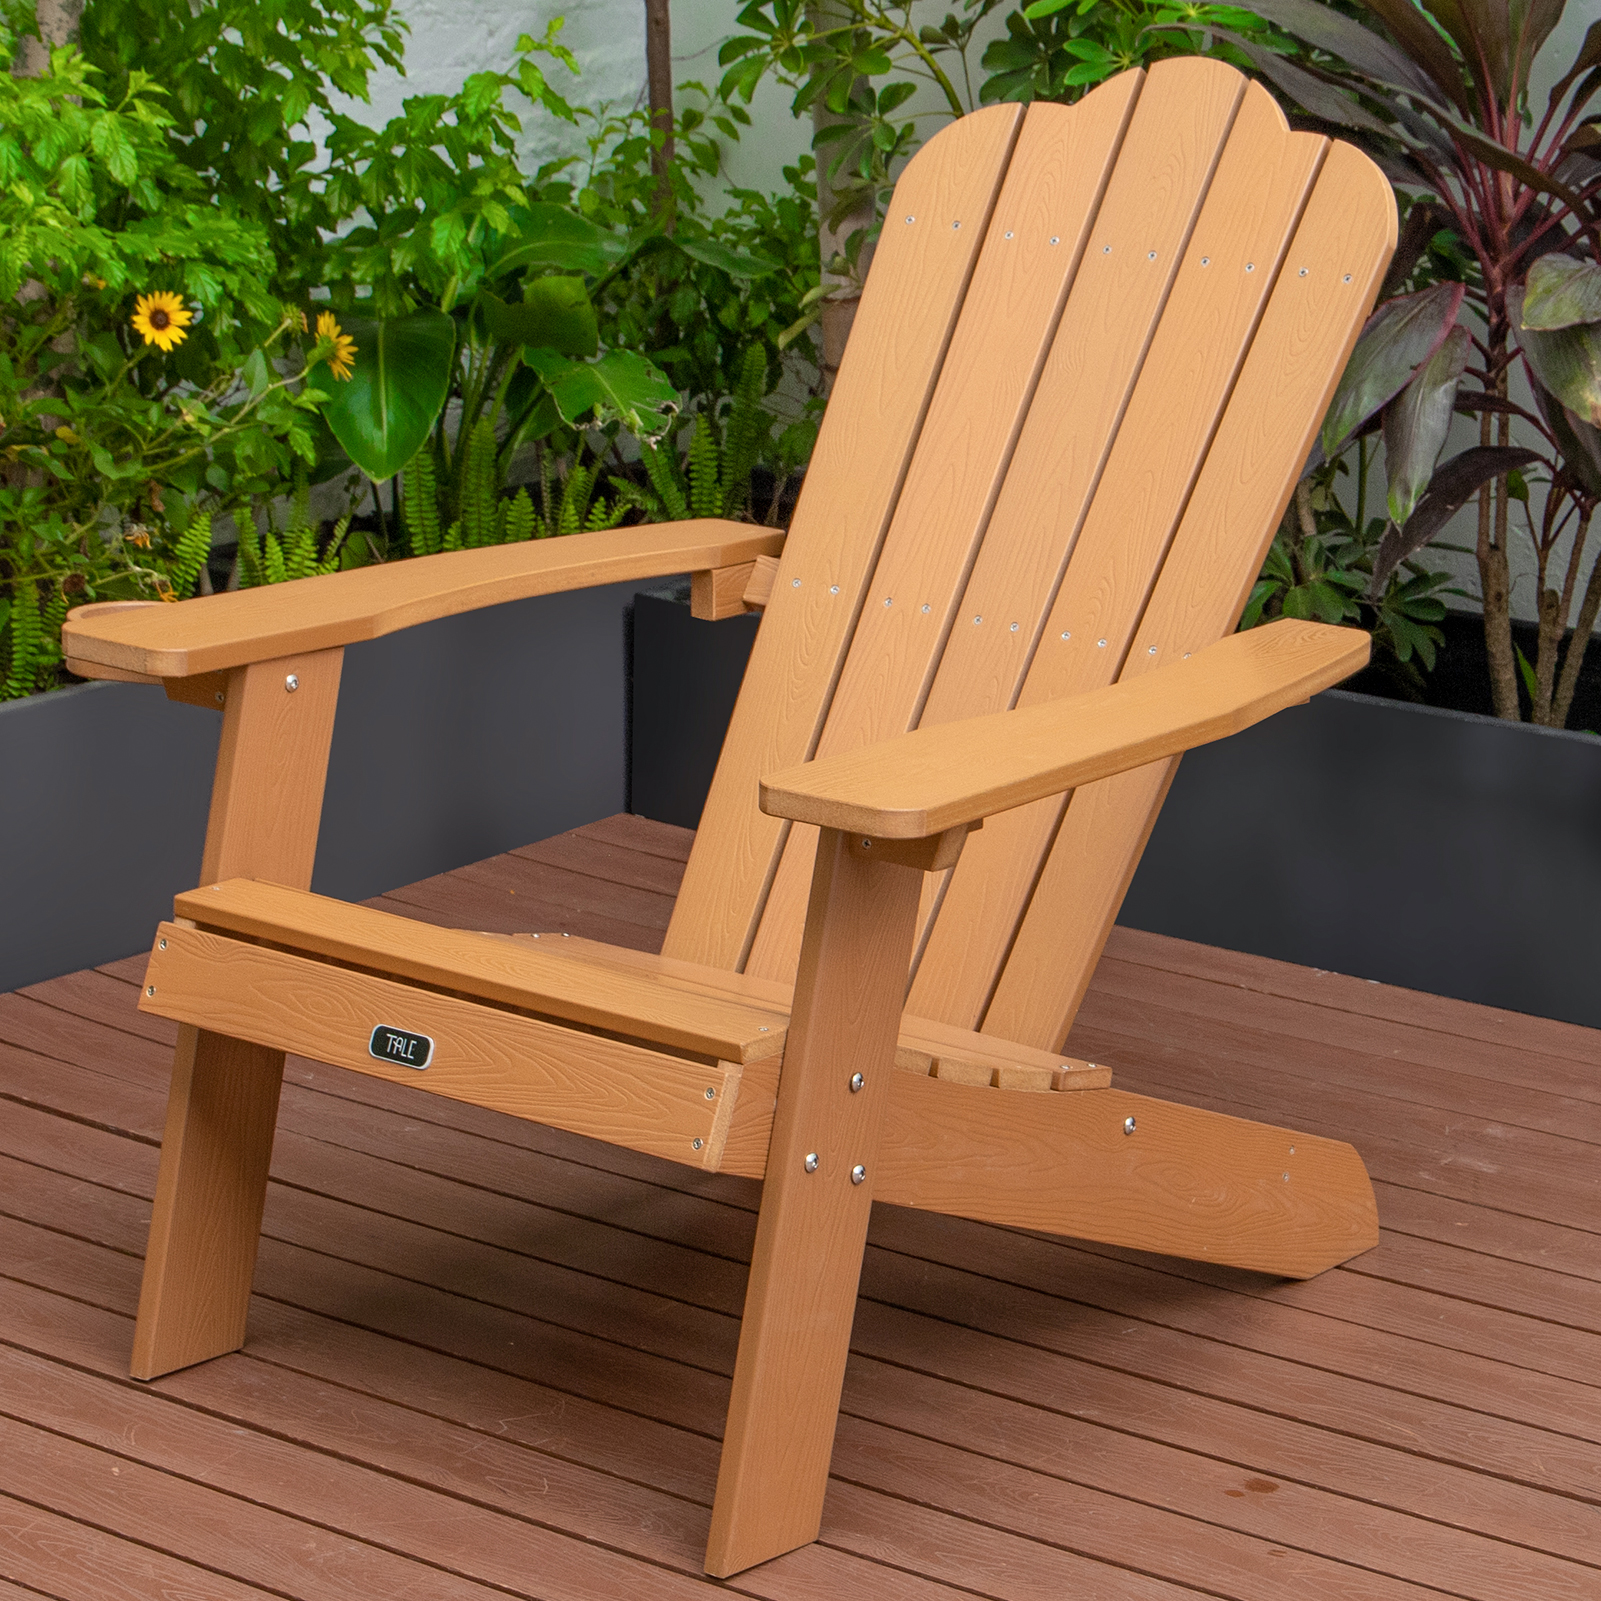 Folding Adirondack Chair, Plastic Wooden Lounge Chairs for Yard, Garden, Patio - image 2 of 7